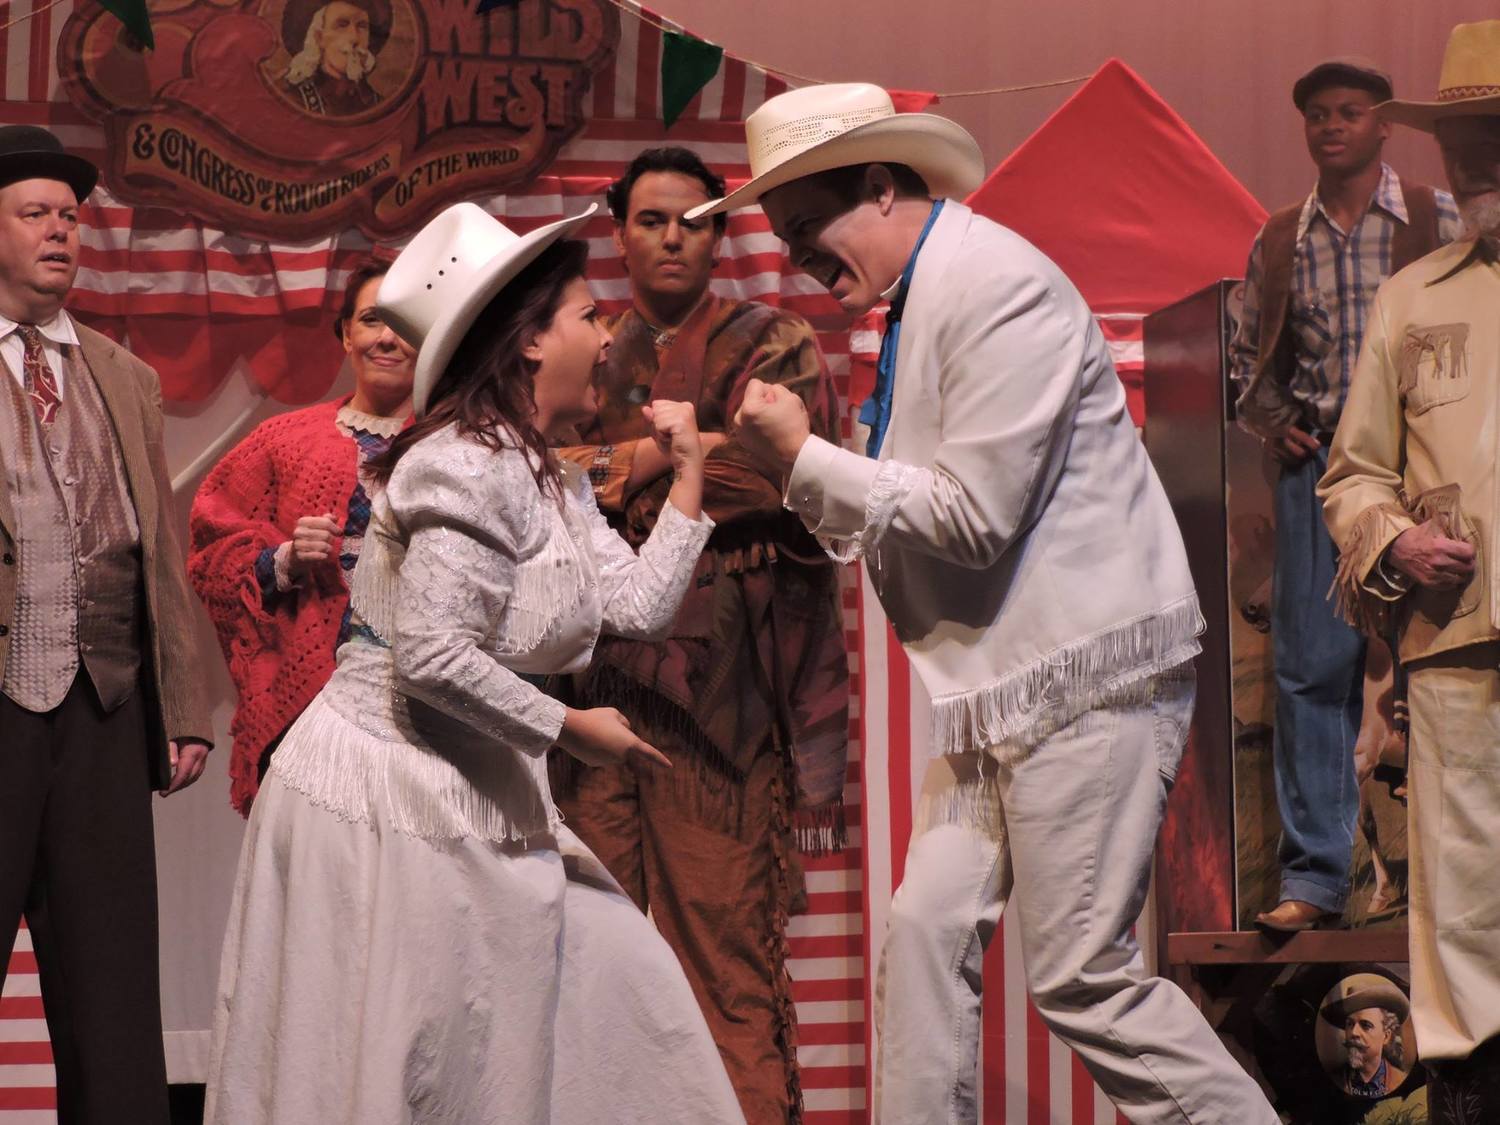 Jordana Forrest as Annie Oakley and James Skiba as Frank Butler in the Curtain Call Playhouse production of Annie Get Your Gun. http://www.geoffreybshort.com/events.html